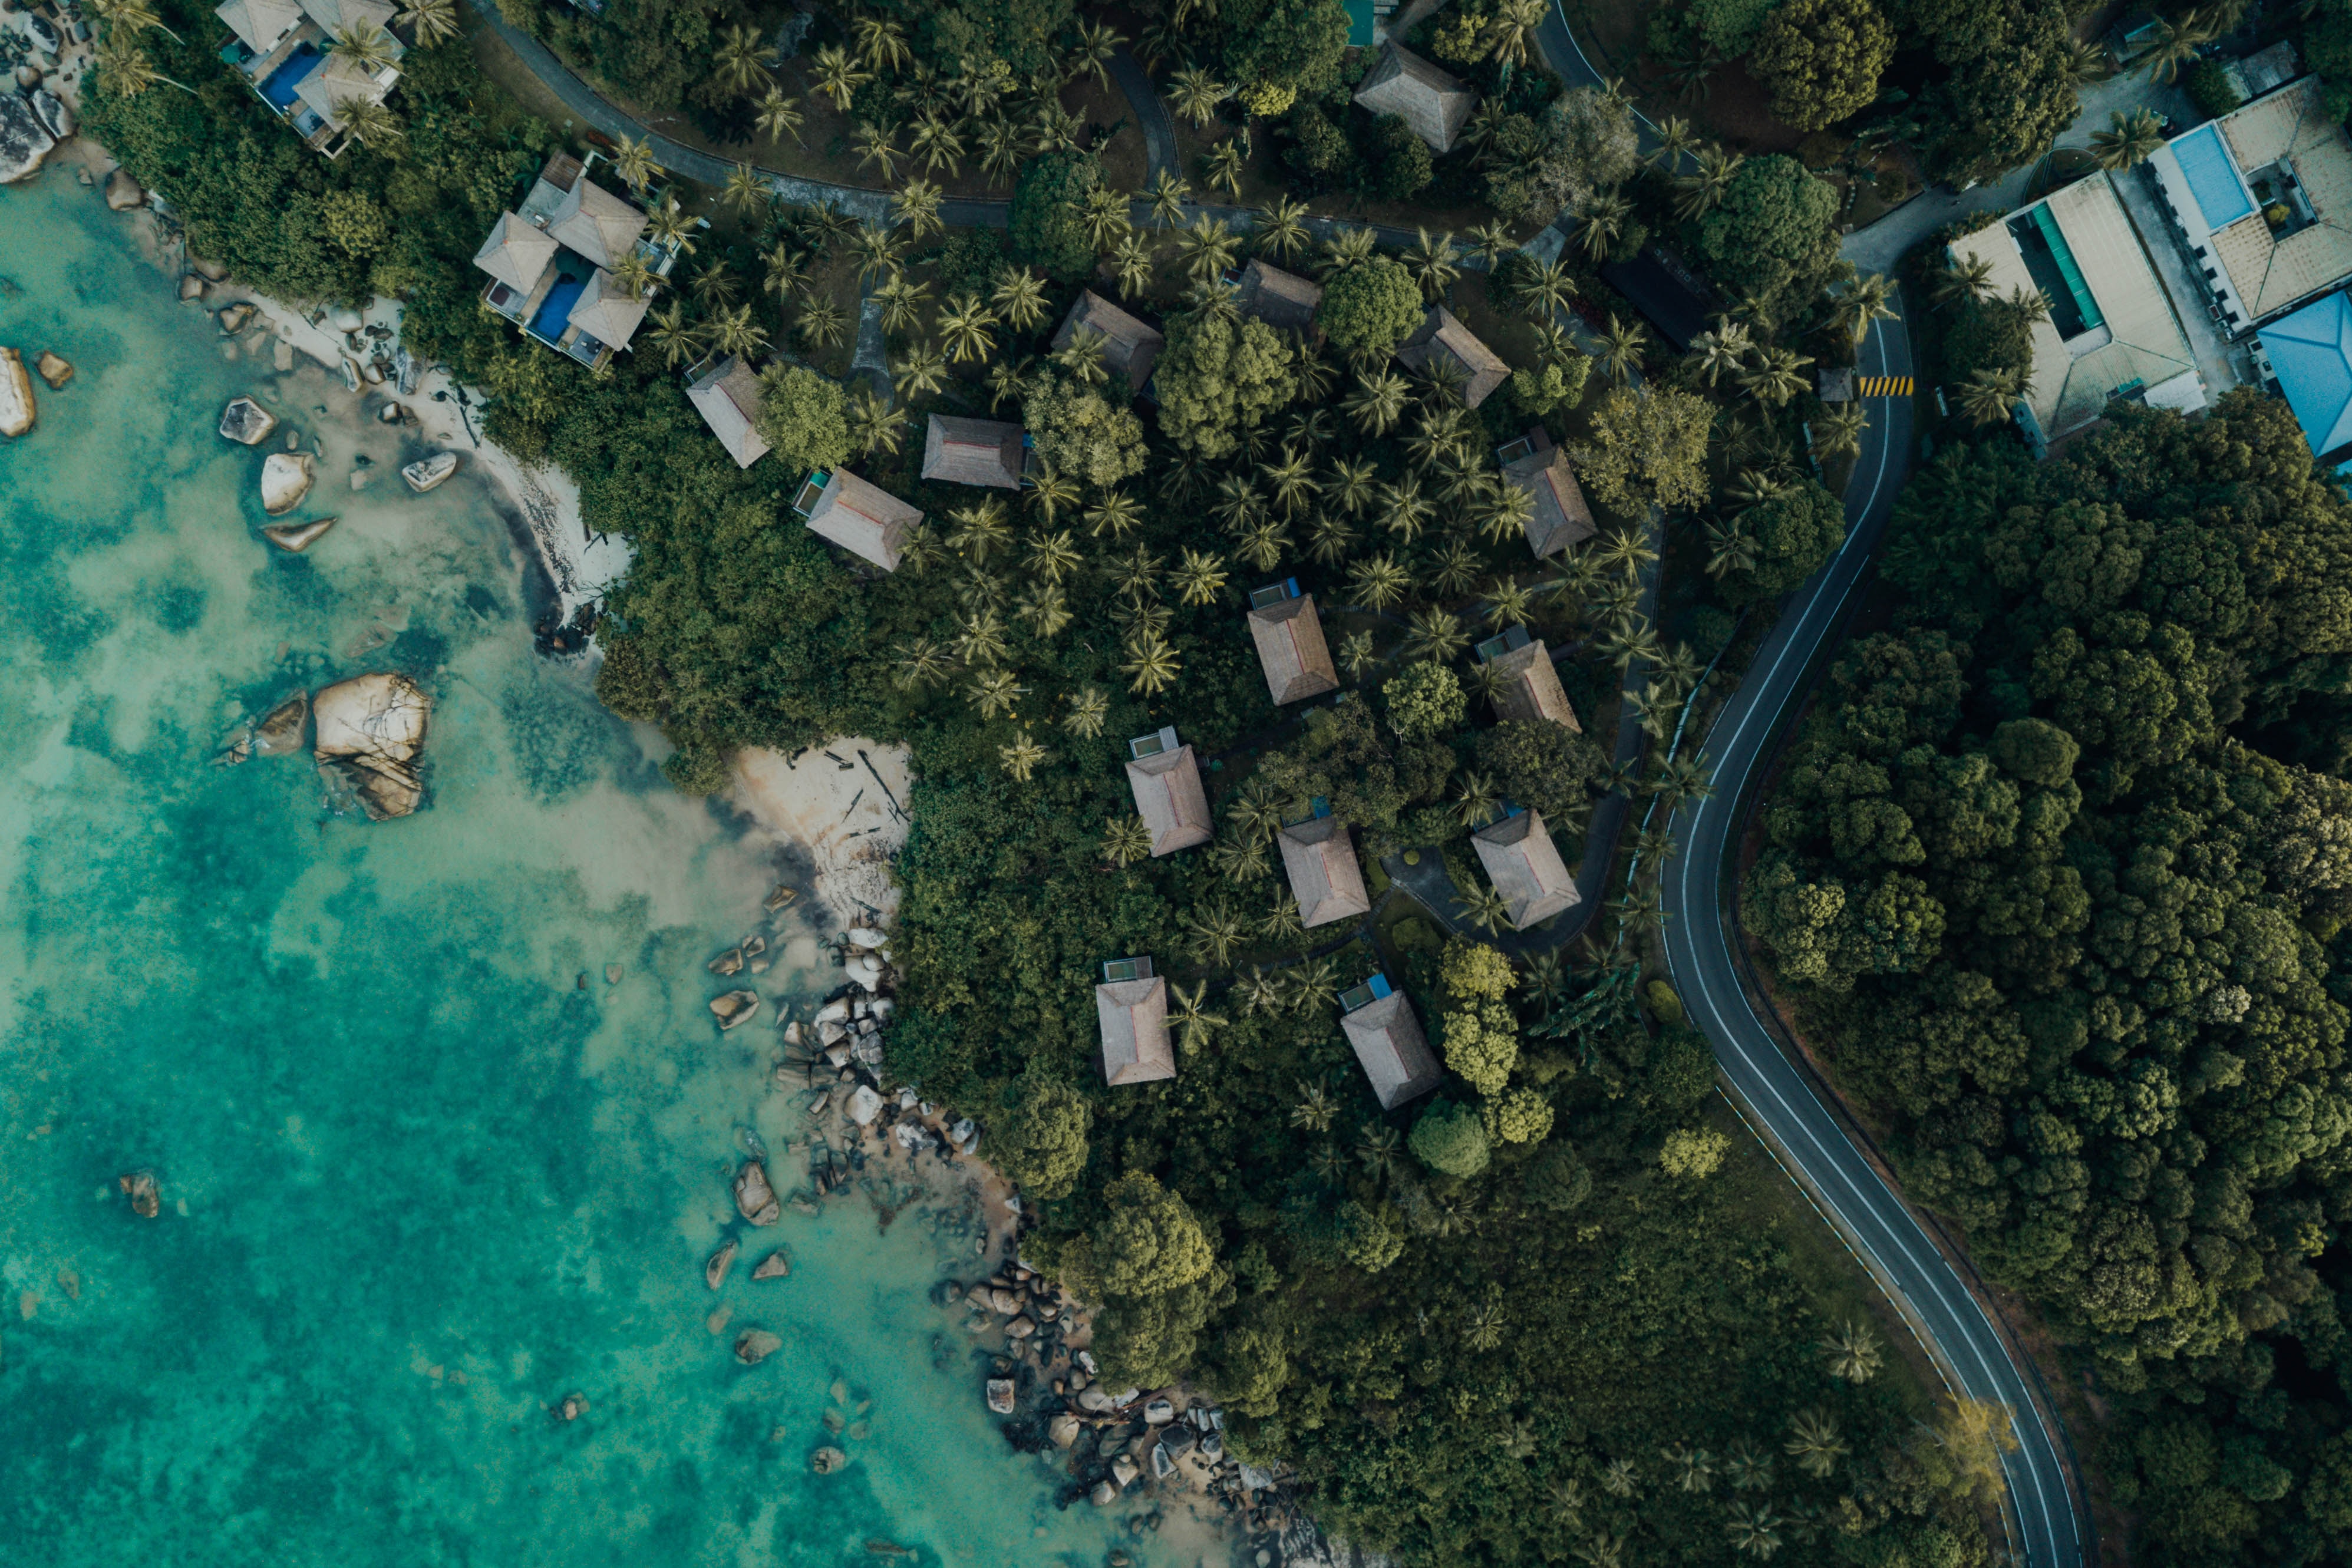 view from above, nature, trees, sea, building, shore, bank High Definition image